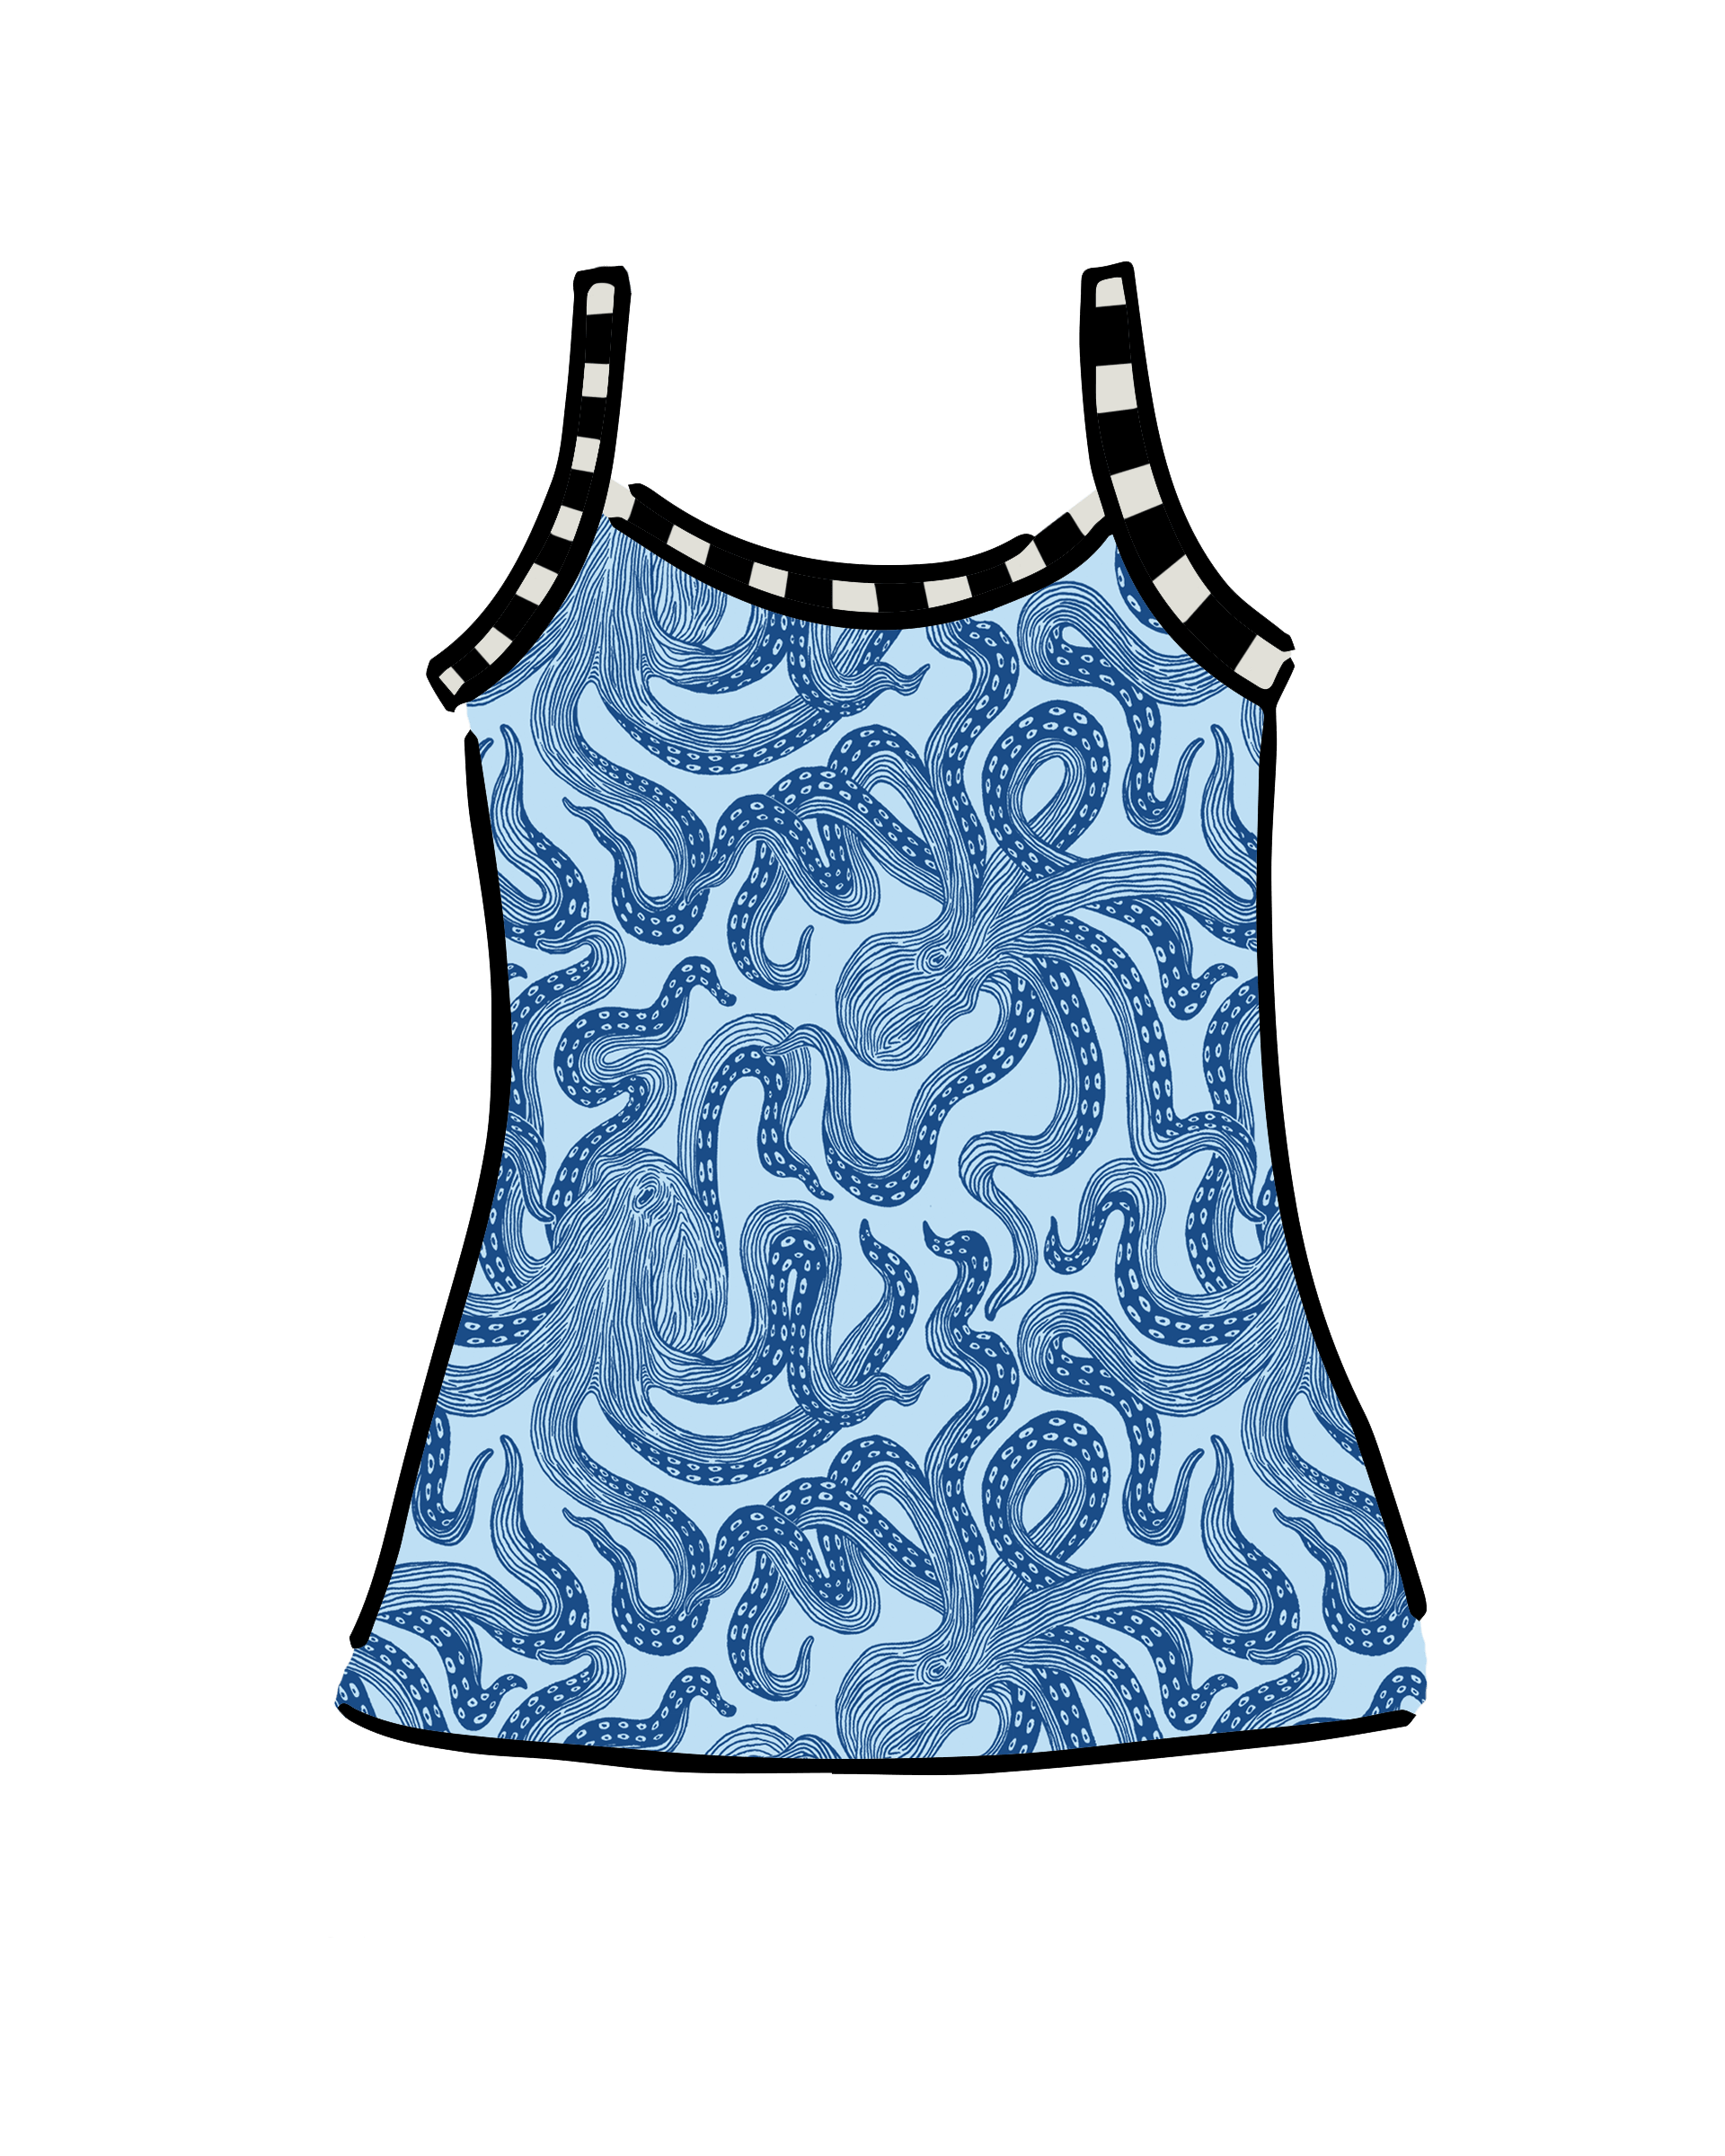 Drawing of Thunderpants Camisole in Octo-Pants print - dark blue octopus on light blue fabric.